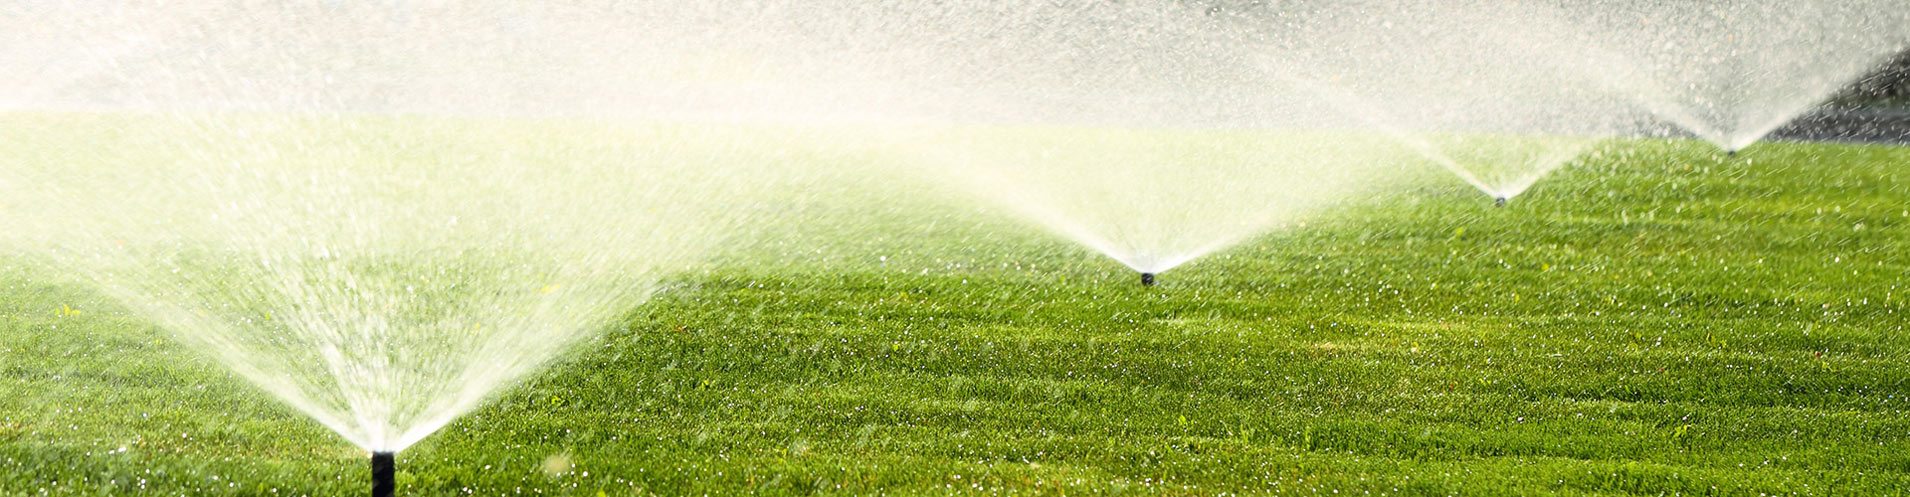 lawn care in topeka, KS lawn care services with a sprinkler